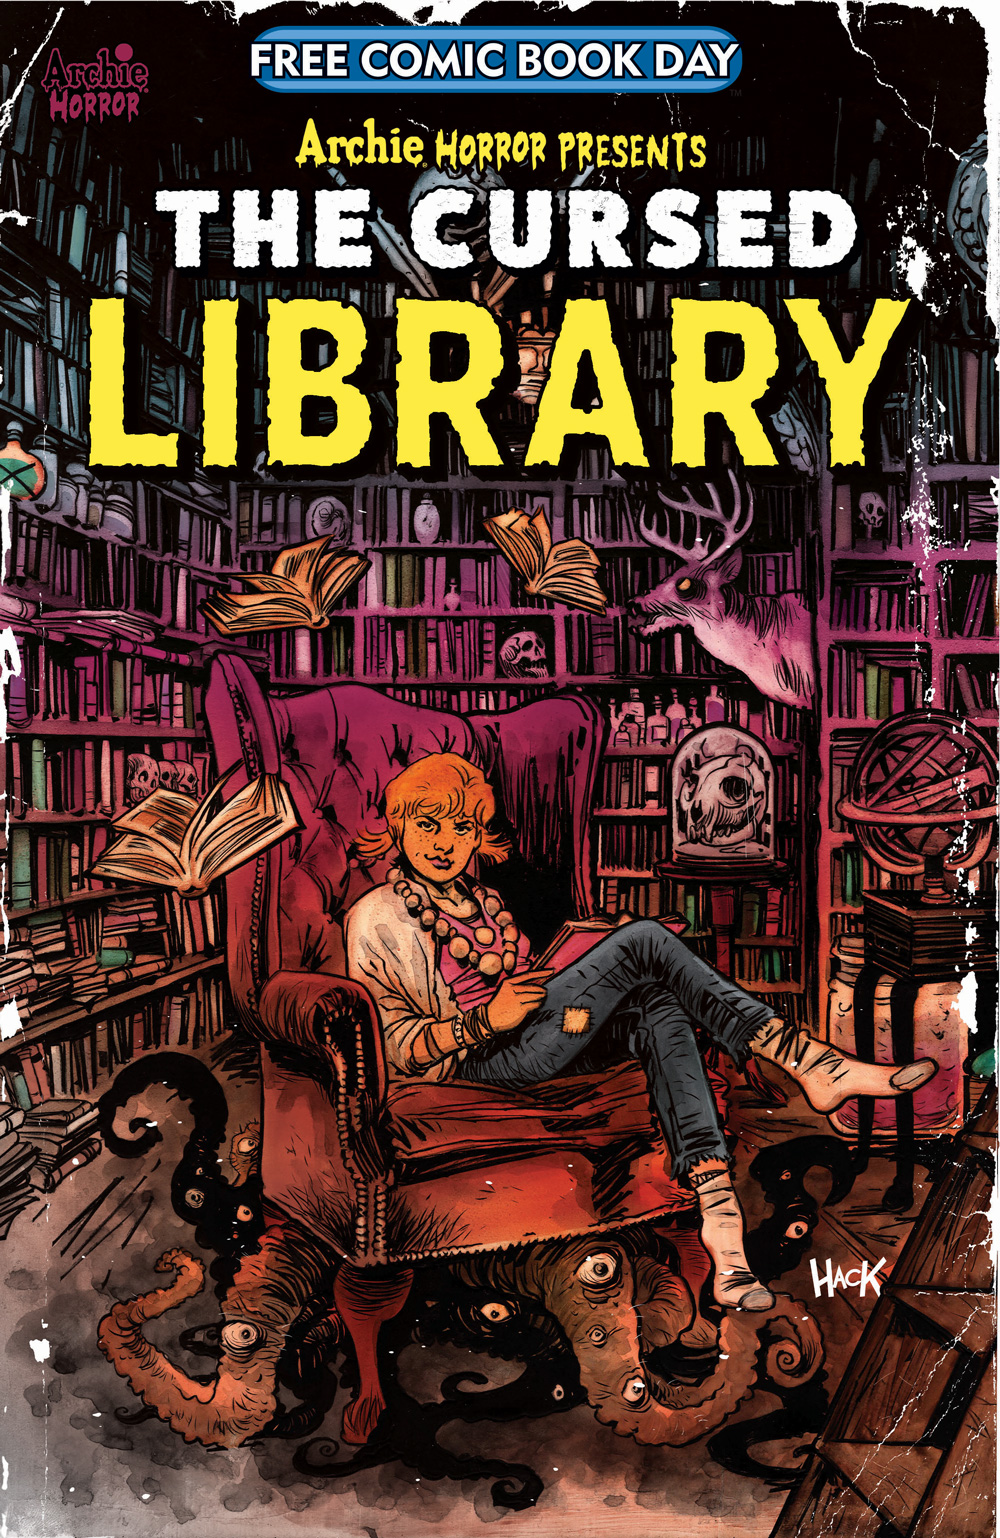 Enter the Cursed Library (if you dare) on Free Comic Book Day ...